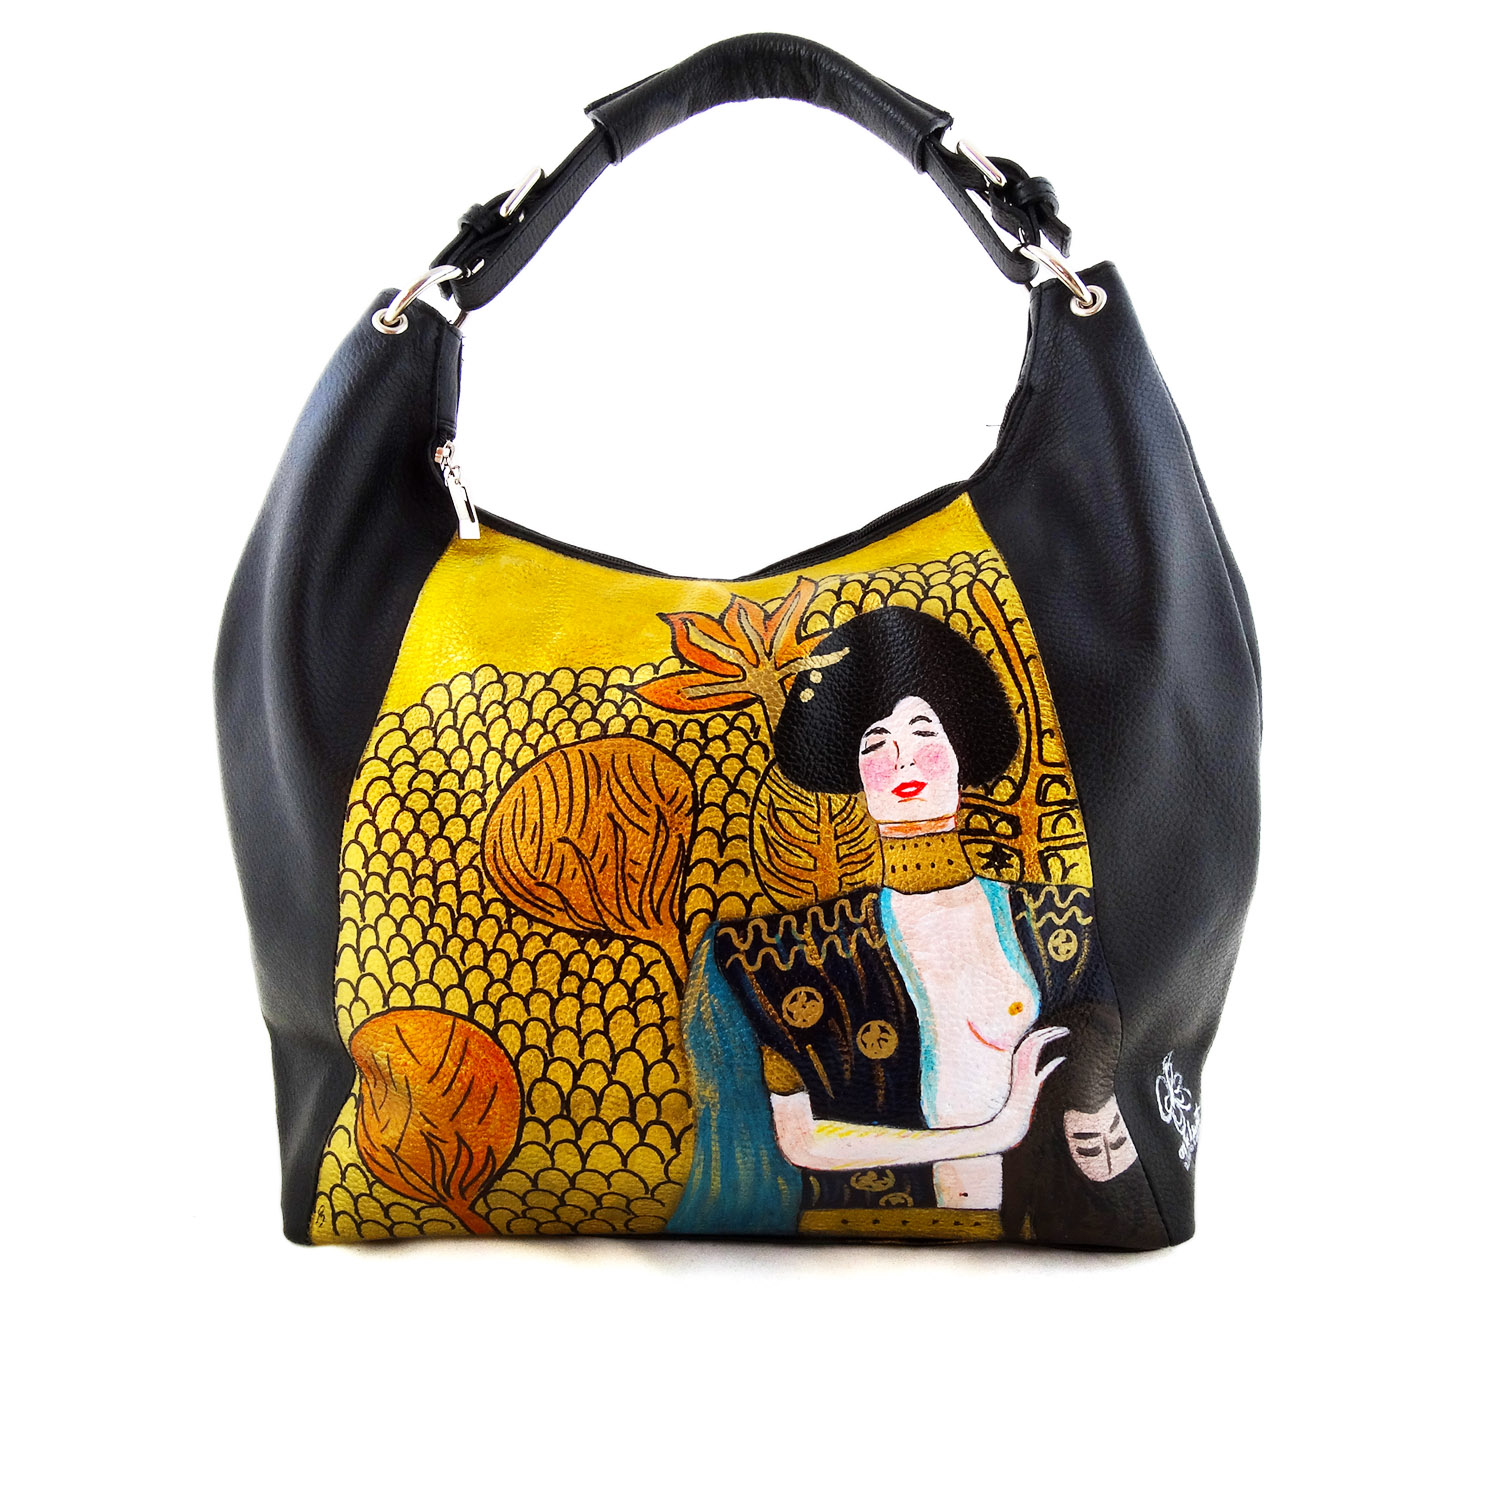 Hand-painted bag - Judith by Klimt